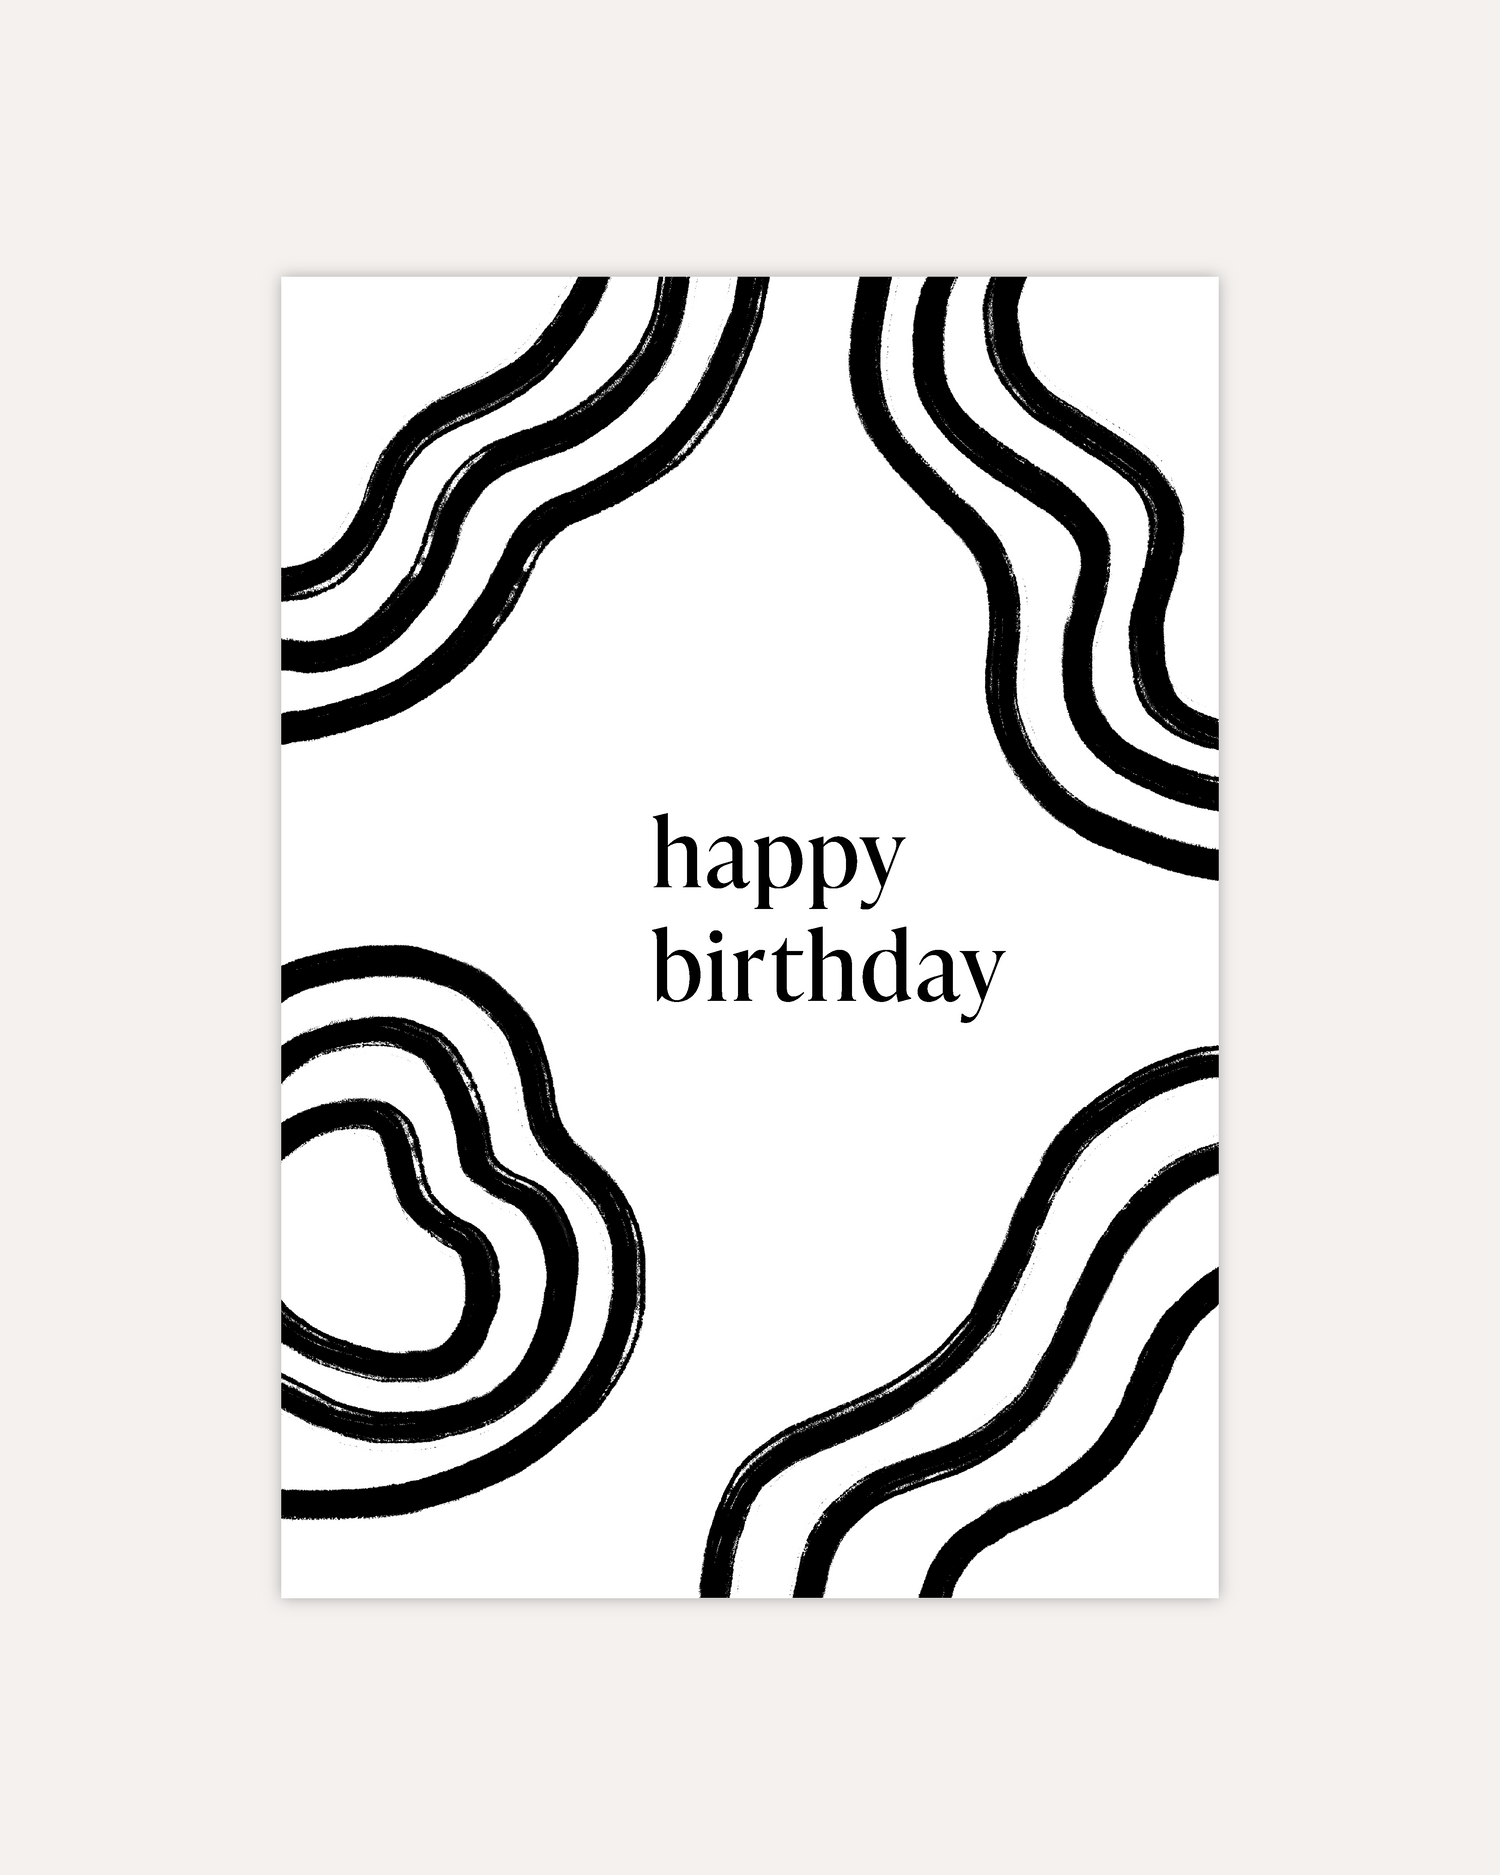 A postcard design consisting of bold black wavy lines and text saying &quot;happy birthday&quot;. The design is shown on a beige background.